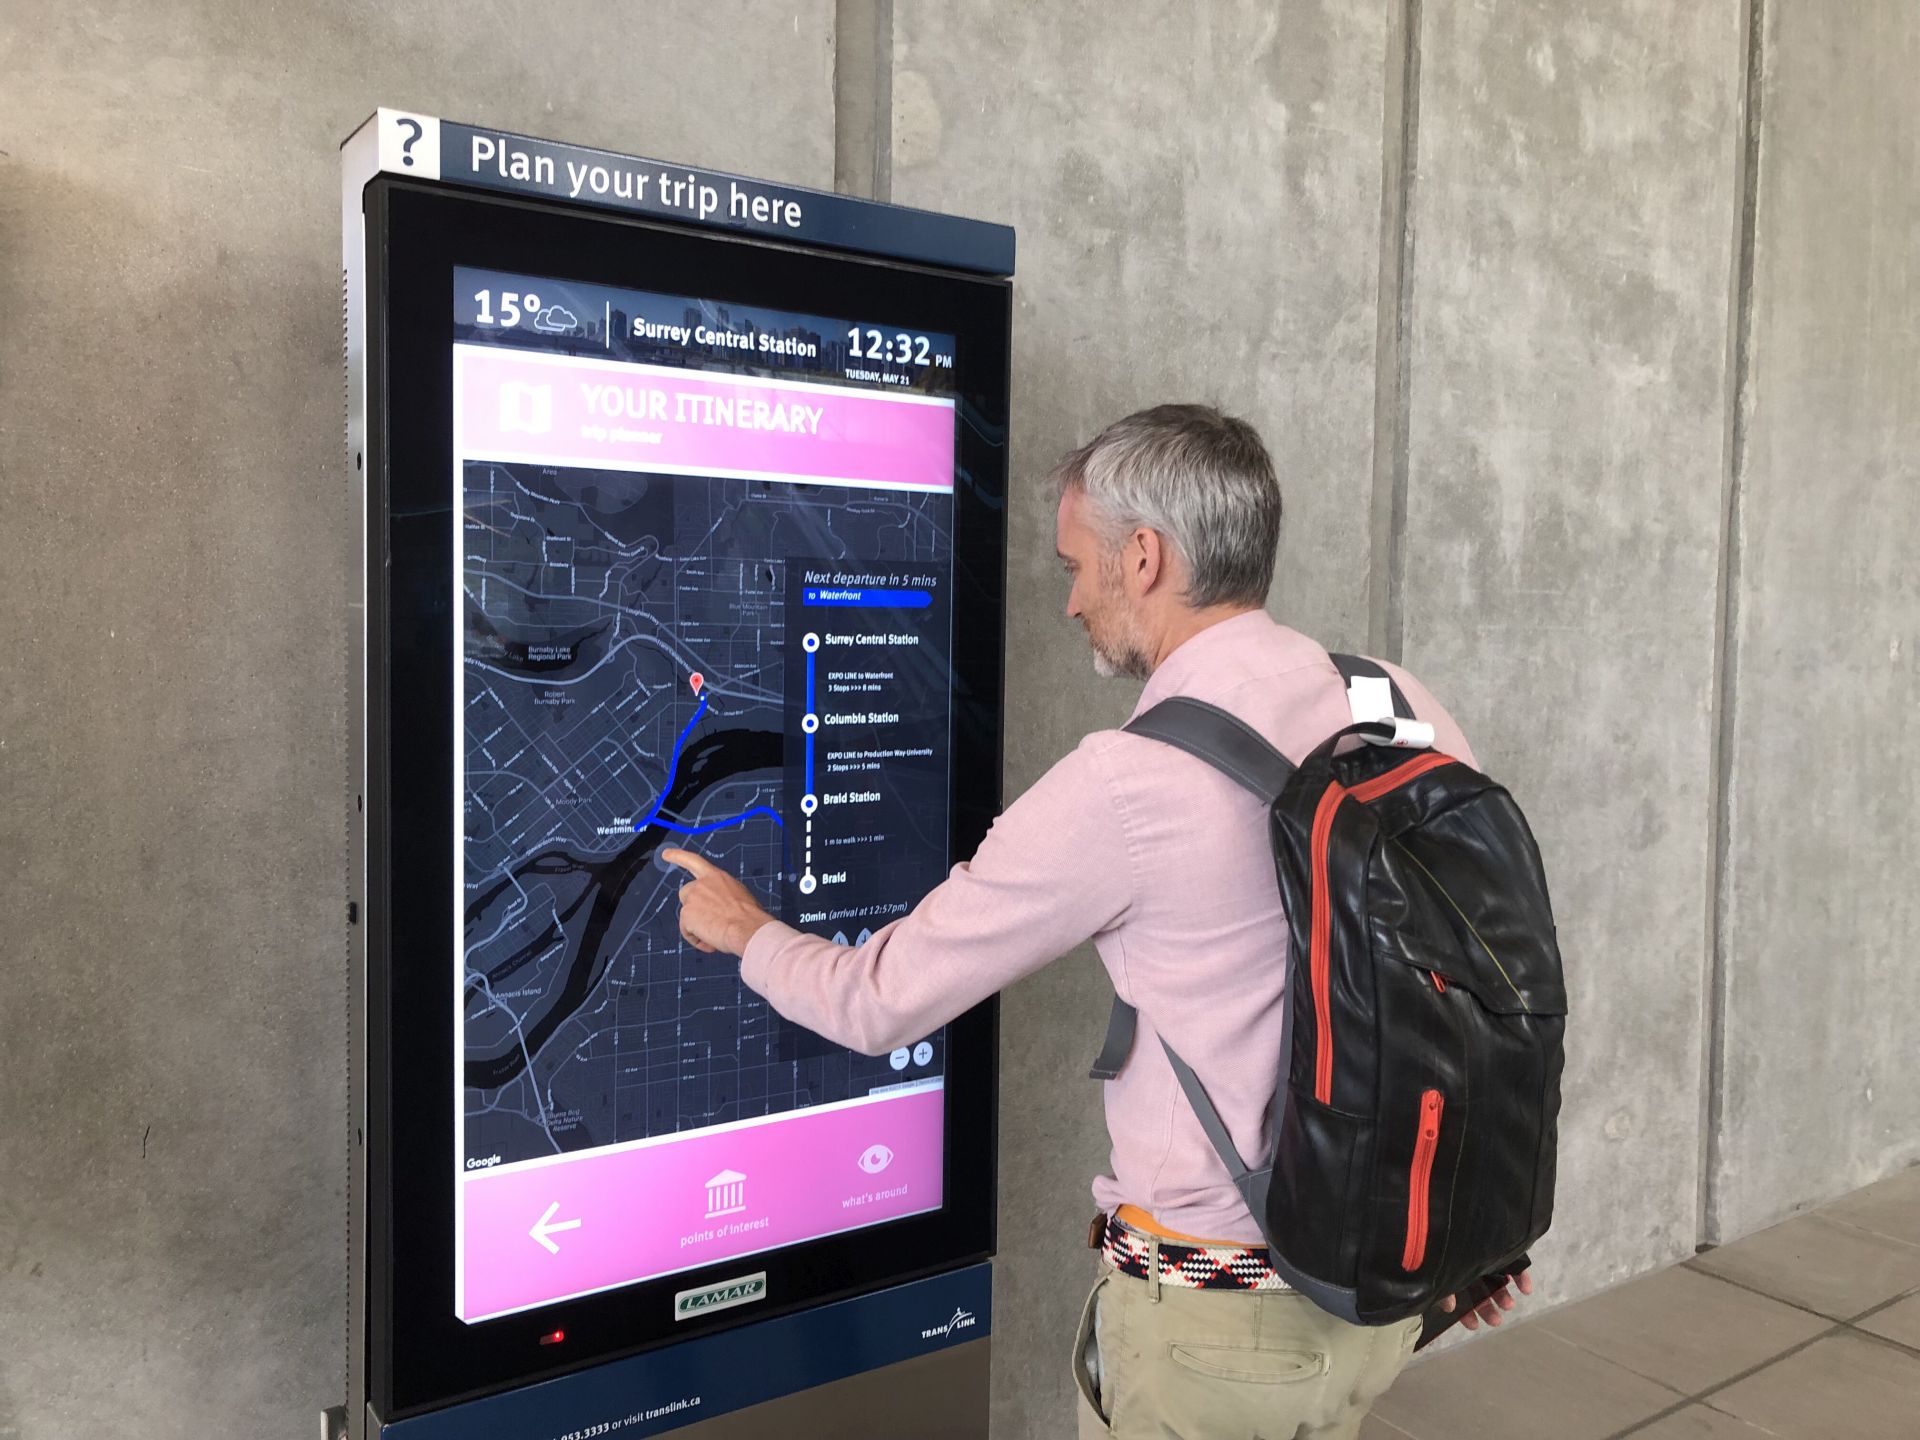 Lamar Advertising Partners with iGotcha Media to Provide Touch-Screen Kiosks for Metro Vancouver’s Regional Transportation Authority TransLink